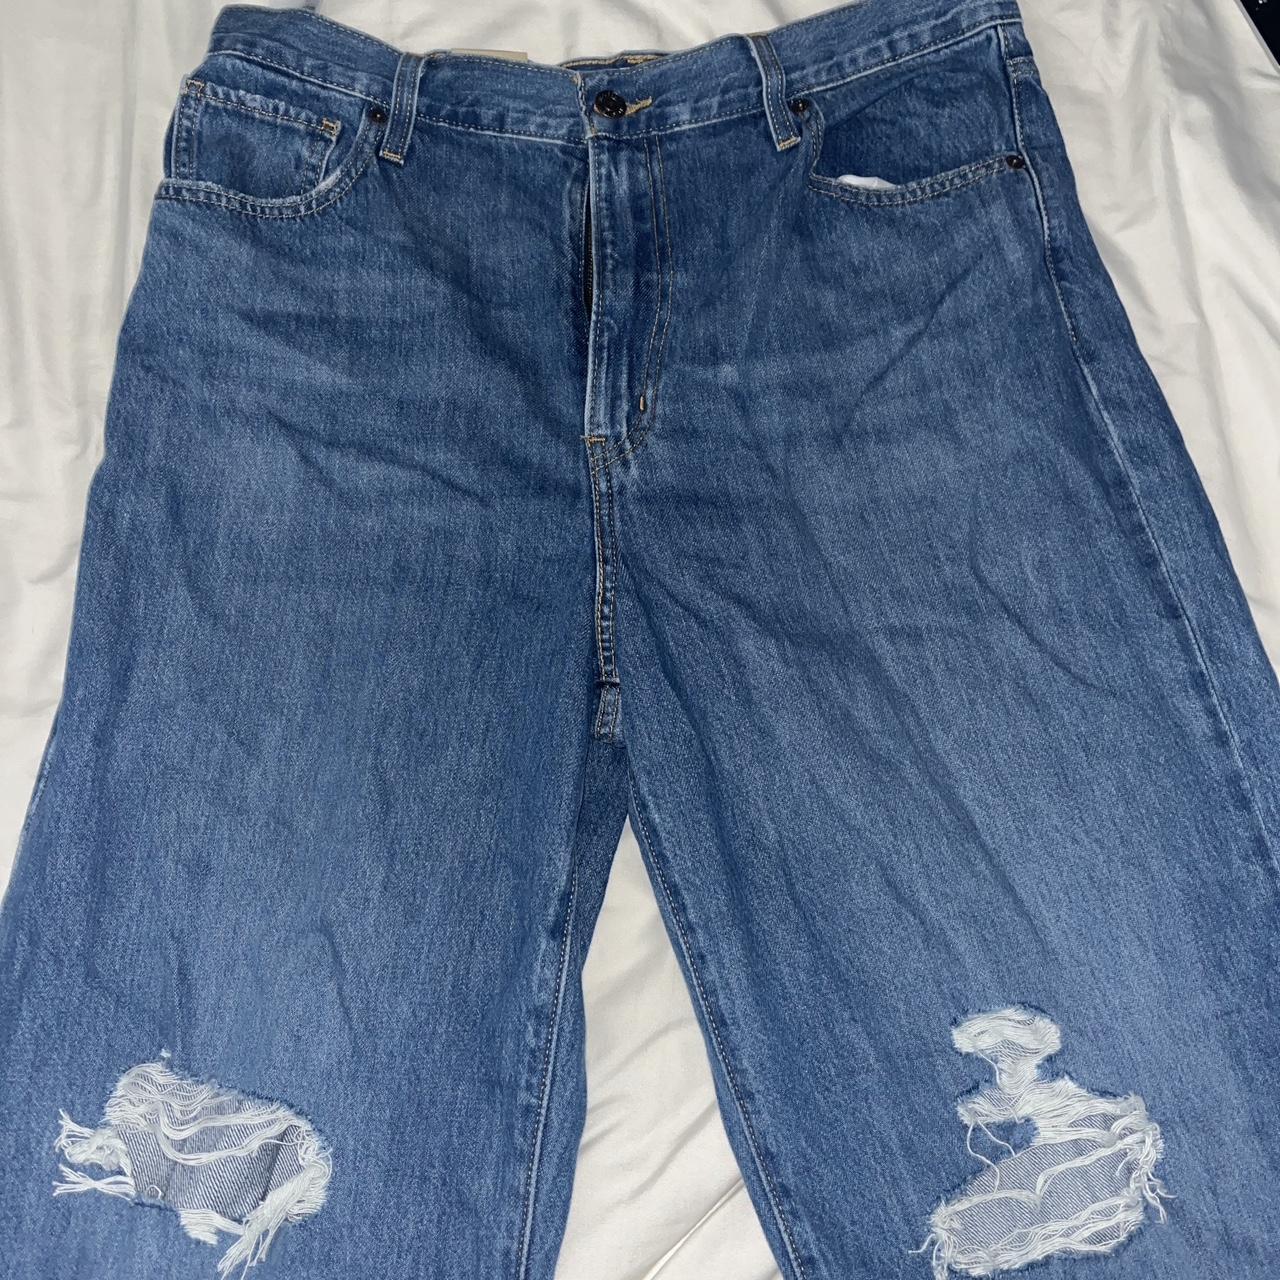 “Levi’s High Wasted Straight Leg Jeans” Brand new... - Depop